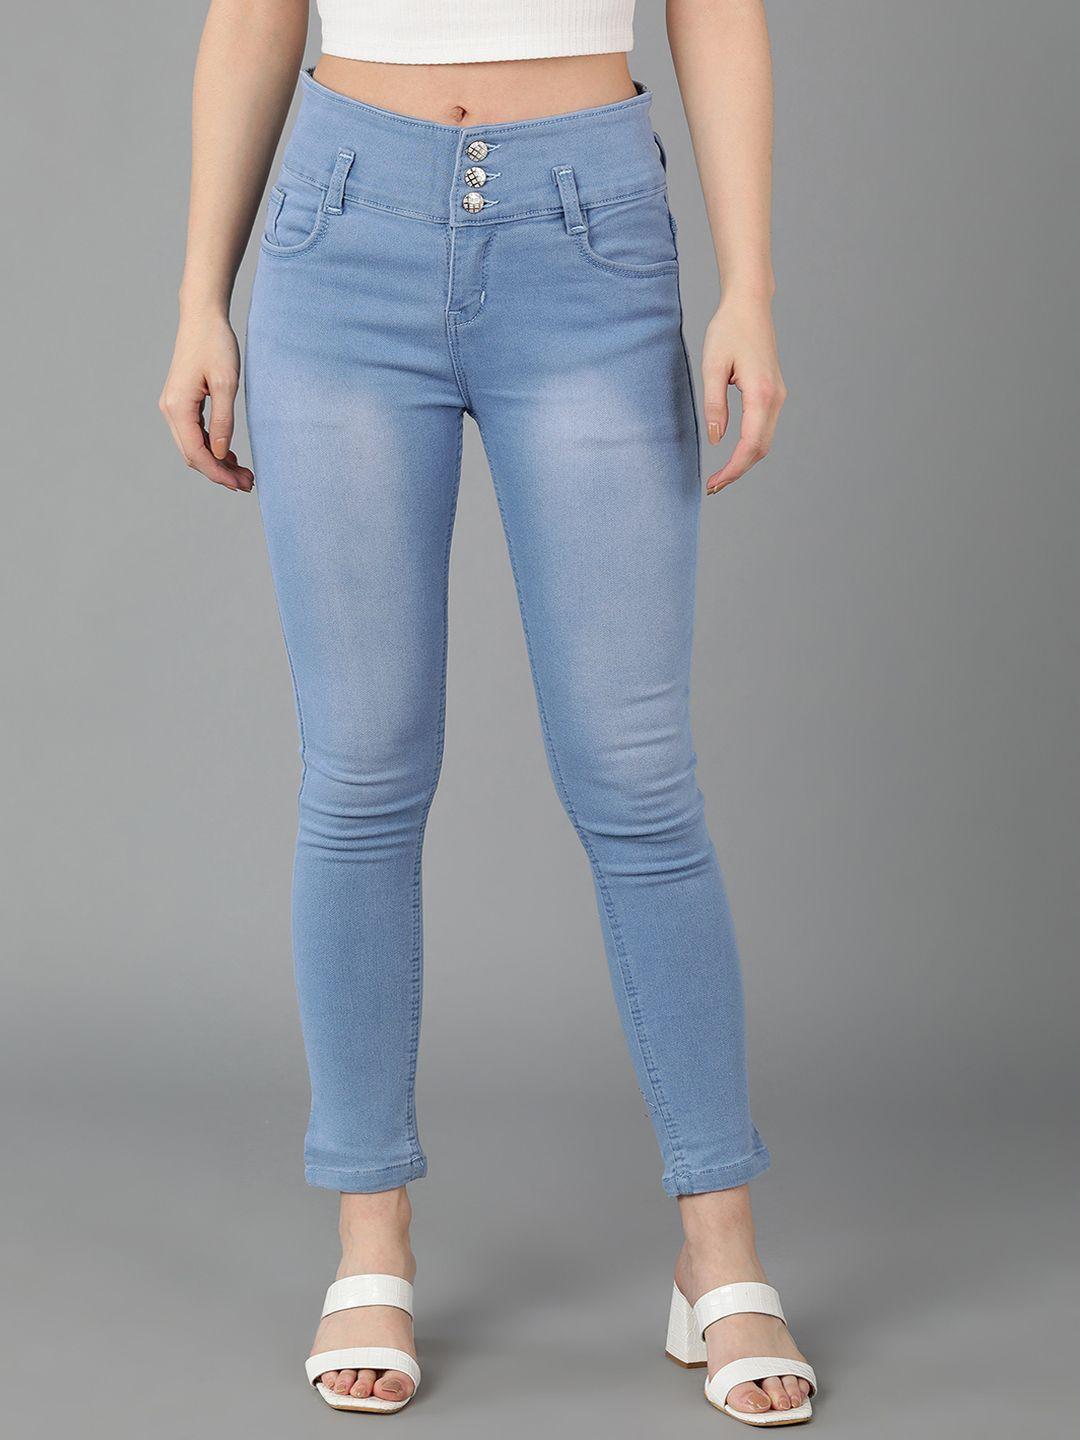 a-okay women skinny fit mid rise light fade stretchable jeans